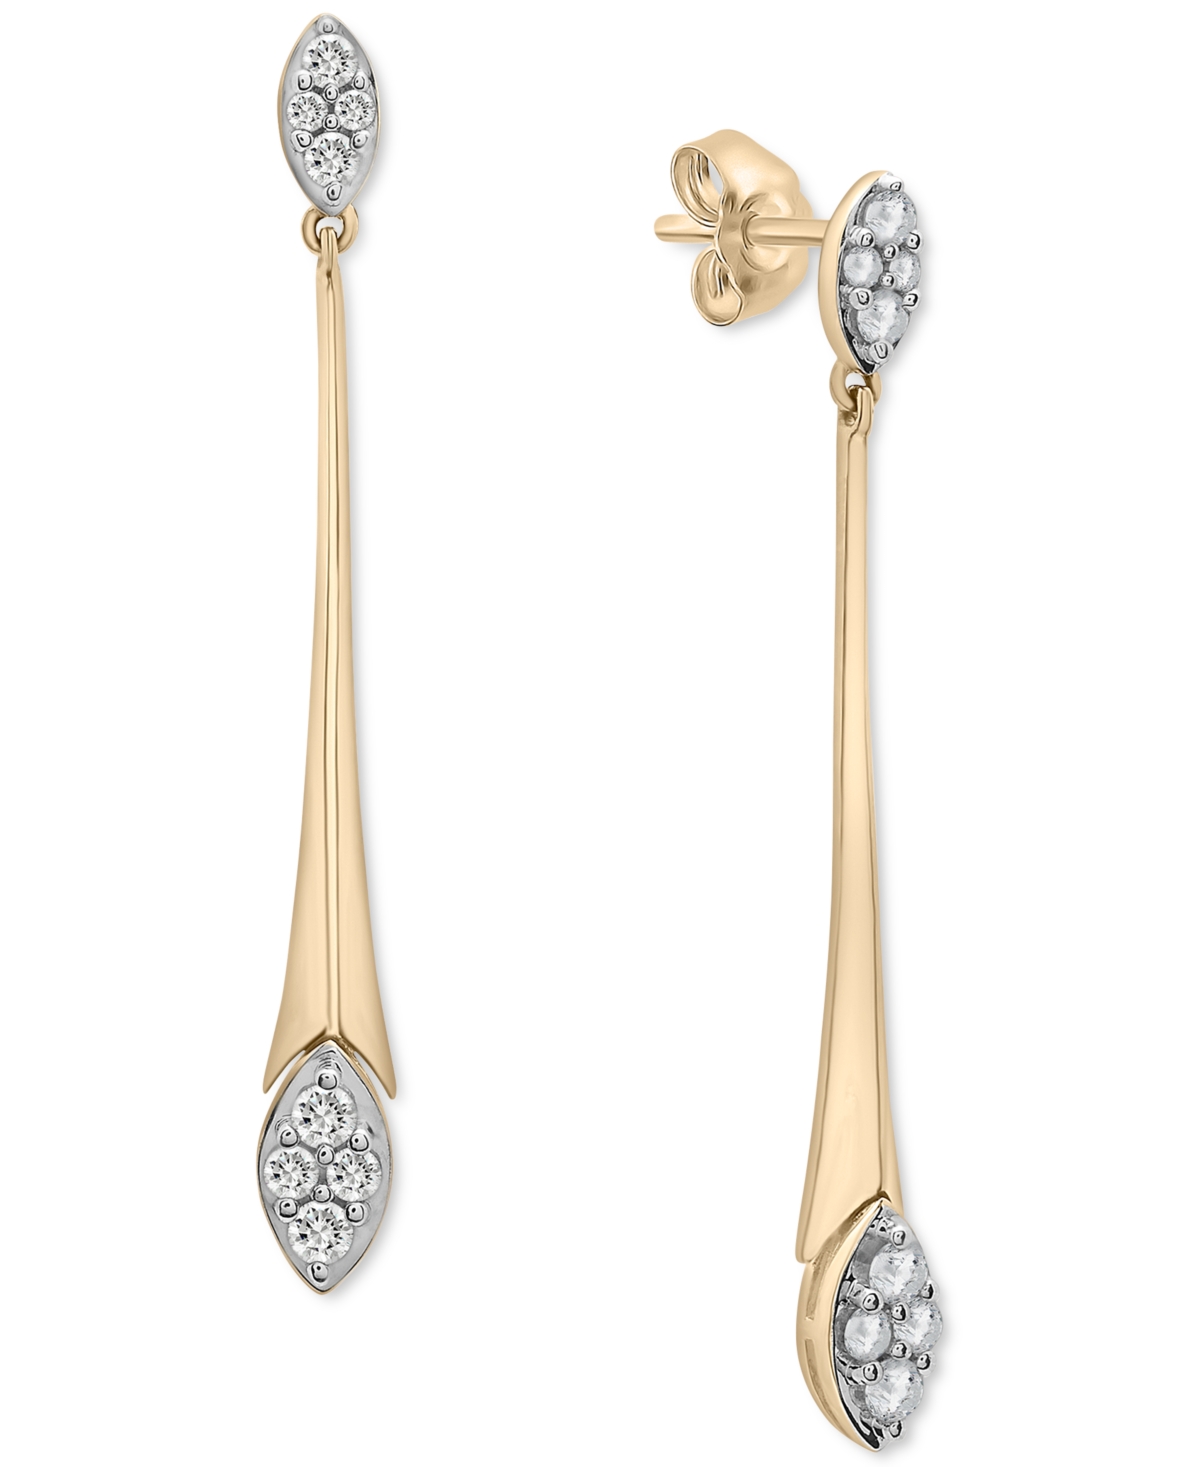 Diamond Elongated Drop Earrings (1/2 ct. t.w.) in 14k Gold, Created for Macy's - Yellow Gold